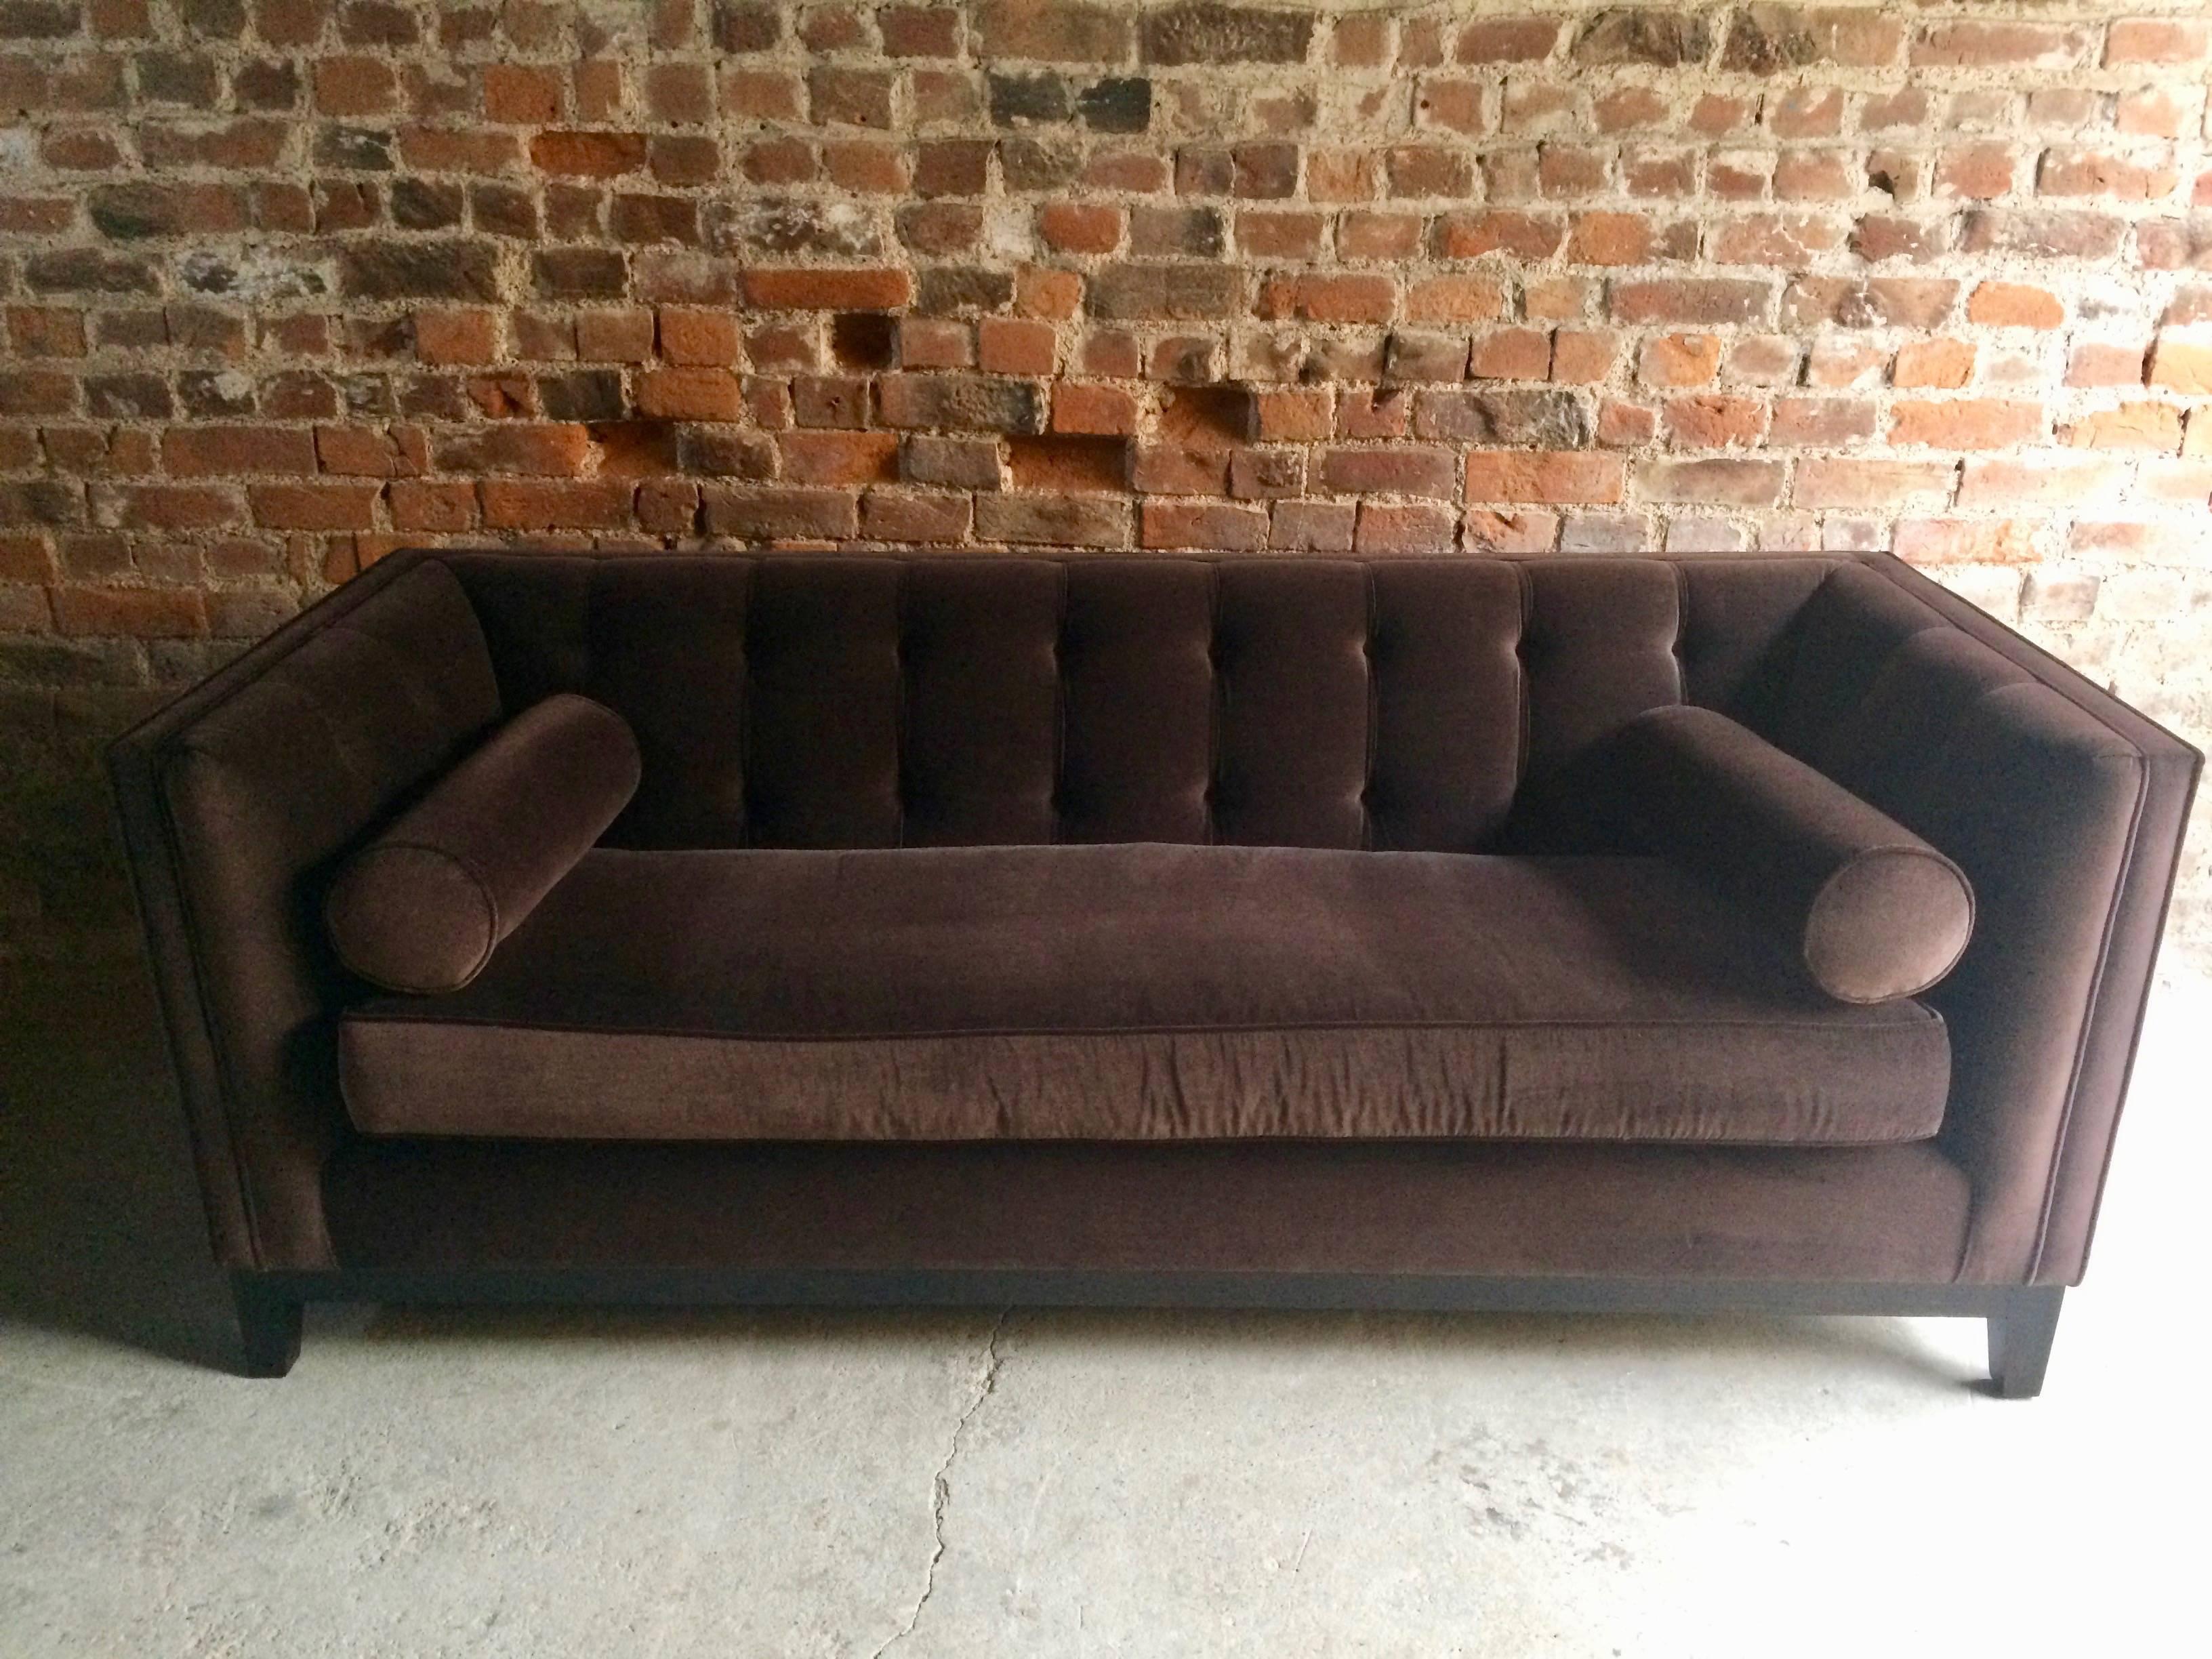 Bespoke Chesterfield Sofa with Matching Foot Stool Brown Velvet Sublime 1